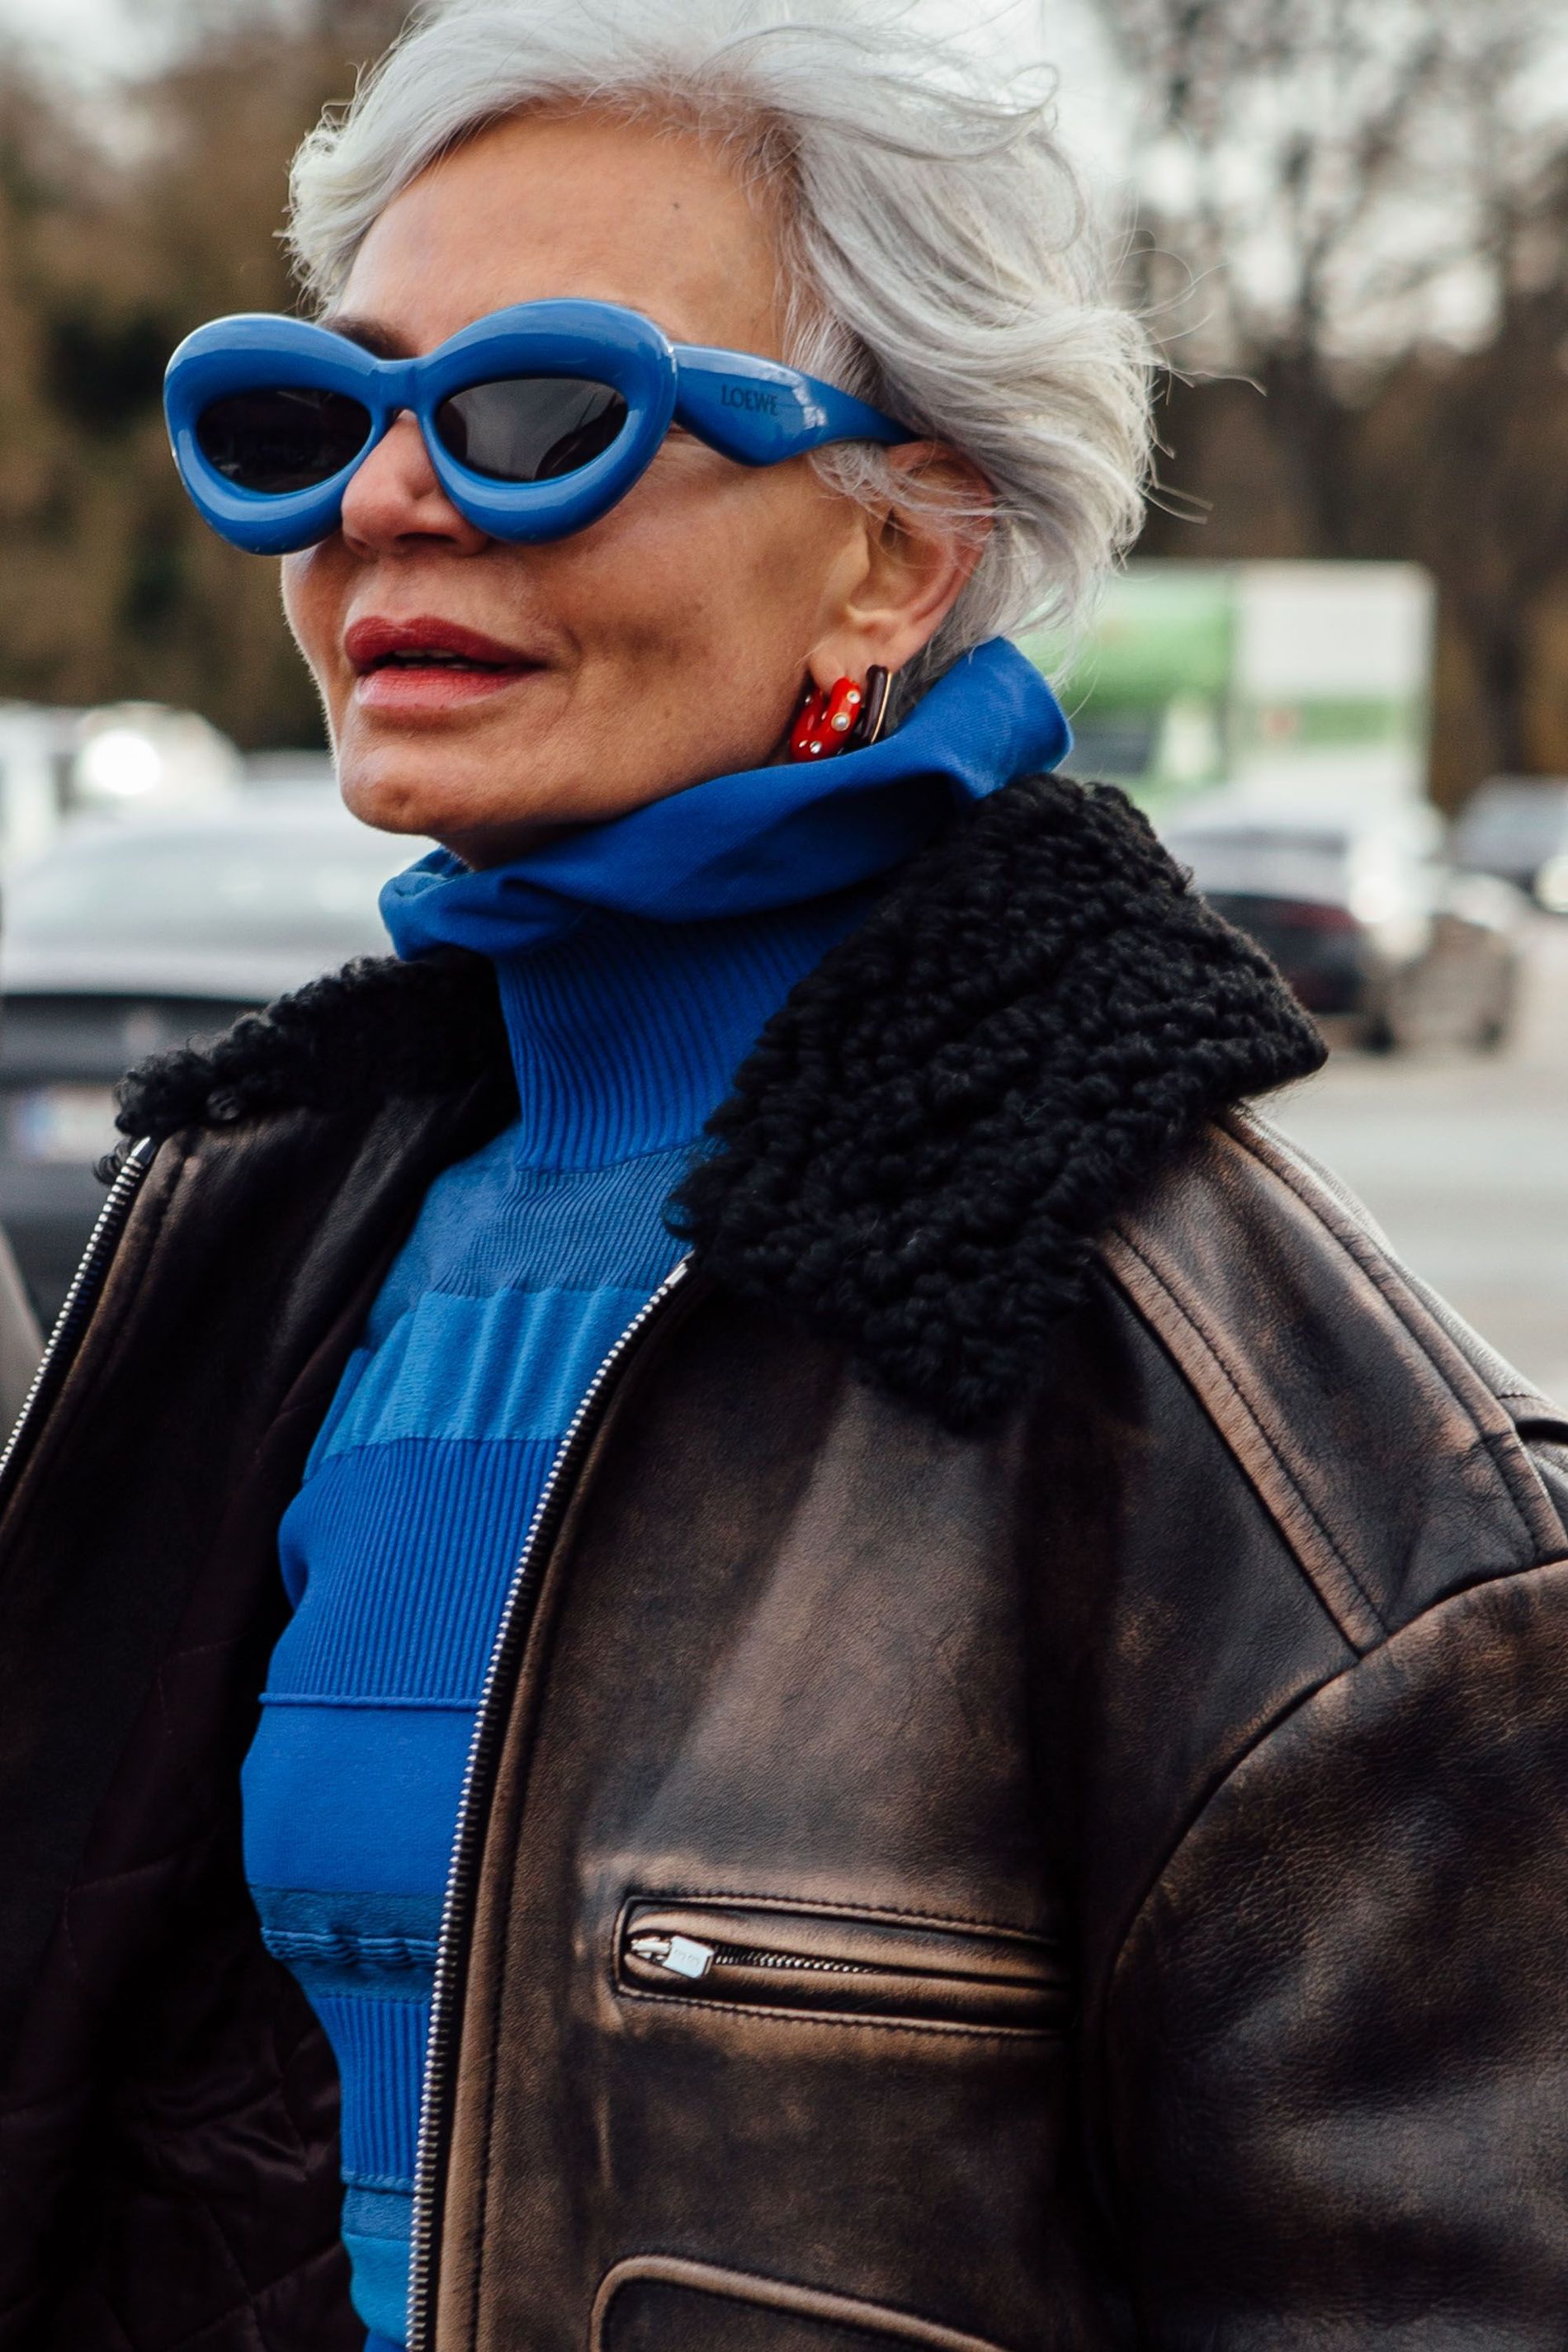 Guest wears blur Loewe bubble sunglasses with matching knitted top and an aviator jacket